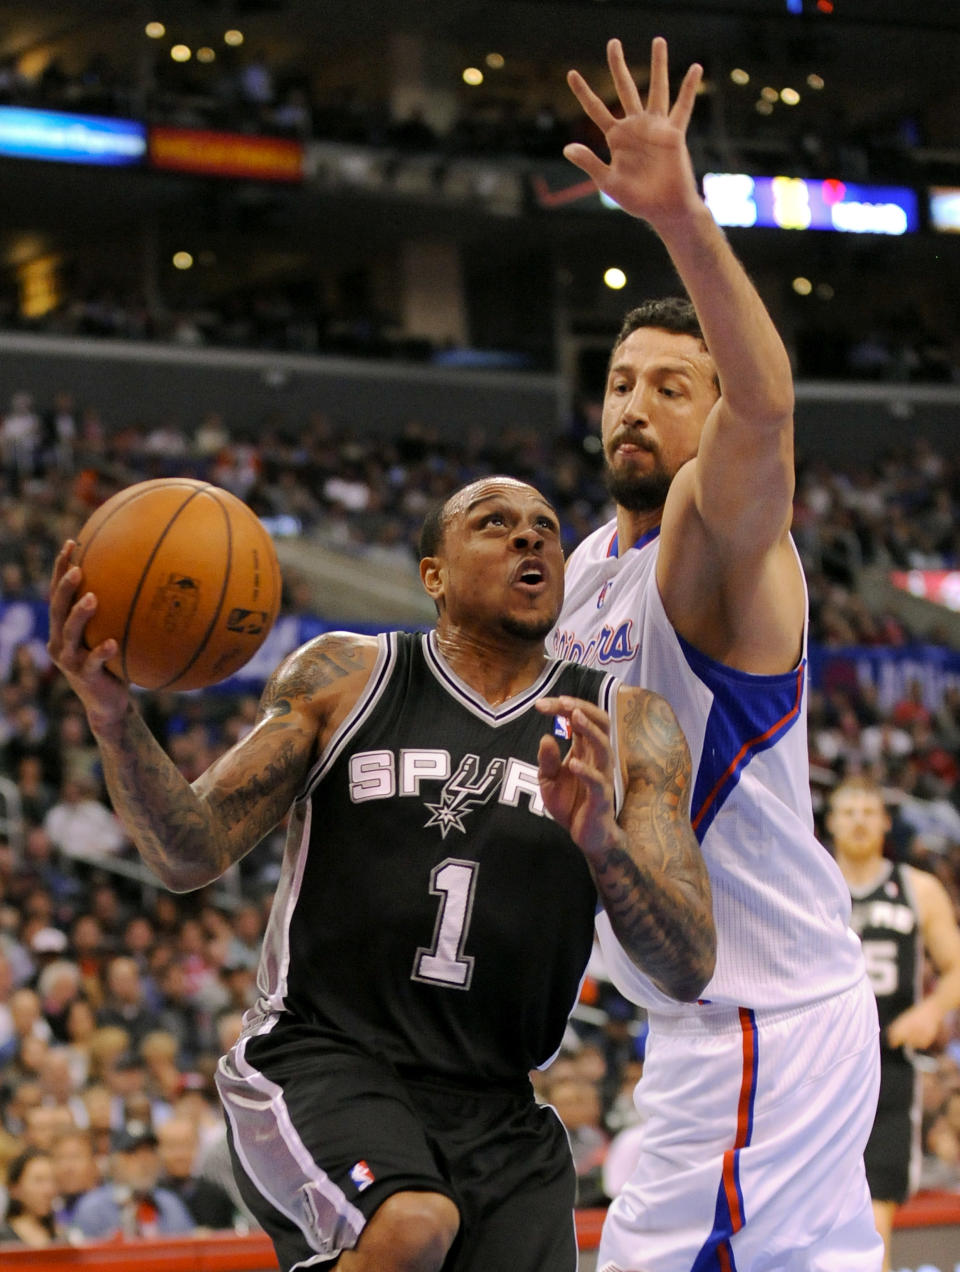 San Antonio Spurs guard Shannon Brown (1) gets by Los Angeles Clippers forward Hedo Turkoglu (8), of Turkey, as he drives to the basket for a basket in the first half of a NBA basketball game, Tuesday, Feb. 18, 2014, in Los Angeles.(AP Photo/Gus Ruelas)